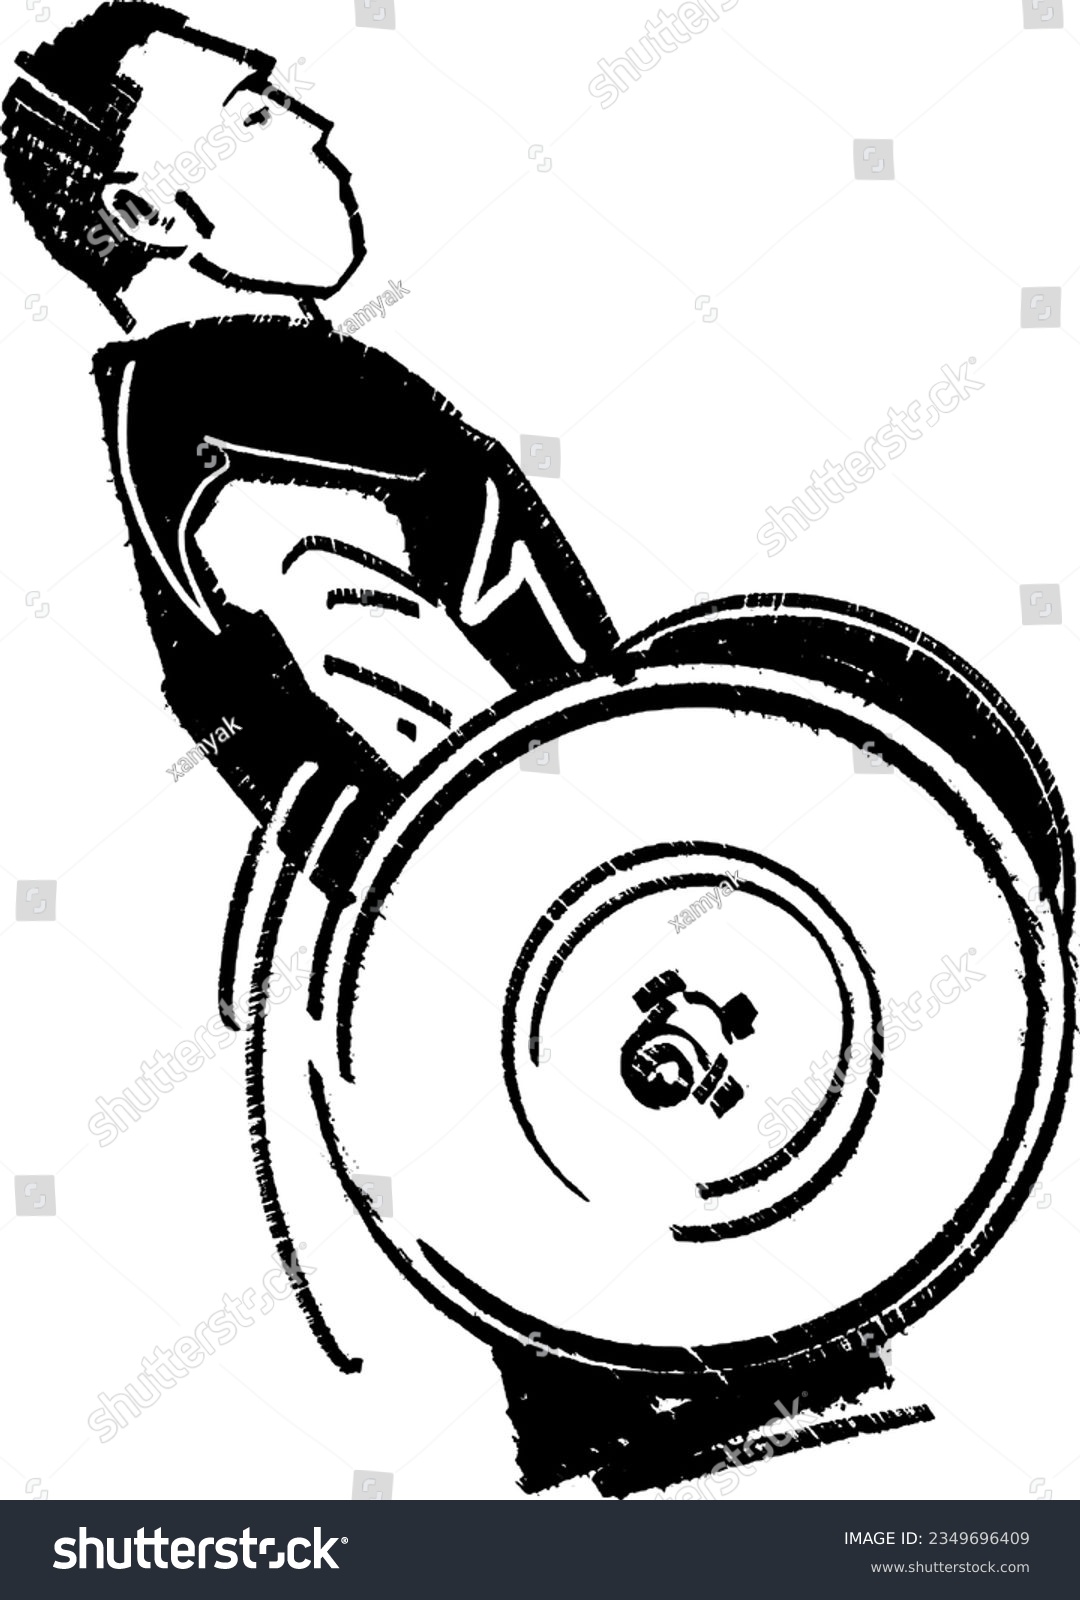 SVG of vector illustration of the weight lifter doing power clean svg